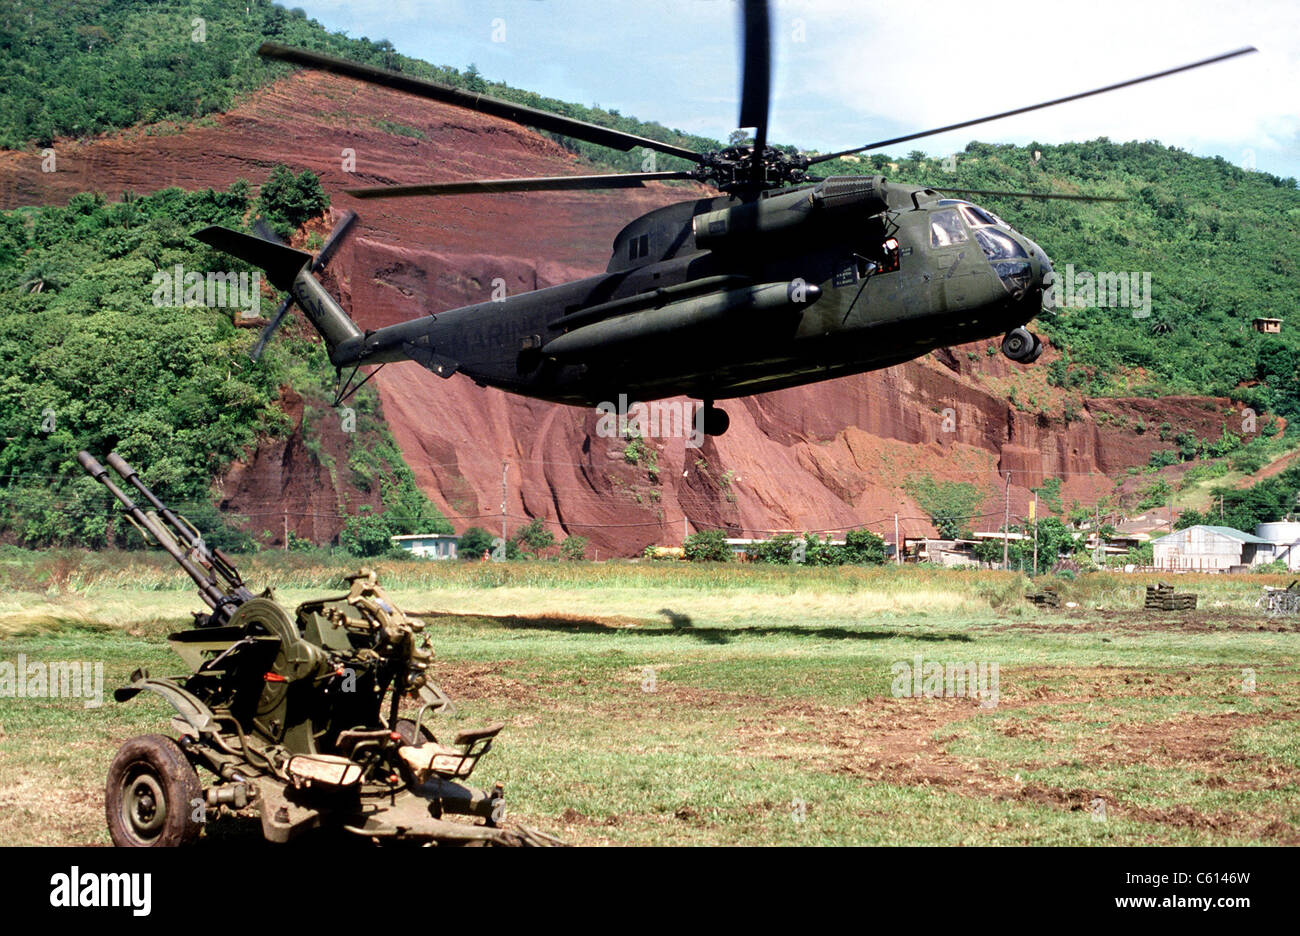 U.S. Marine Corps helicopter hovers near a Soviet anti-aircraft weapon during the U.S. invasion of Grenada in October 1983. The Stock Photo